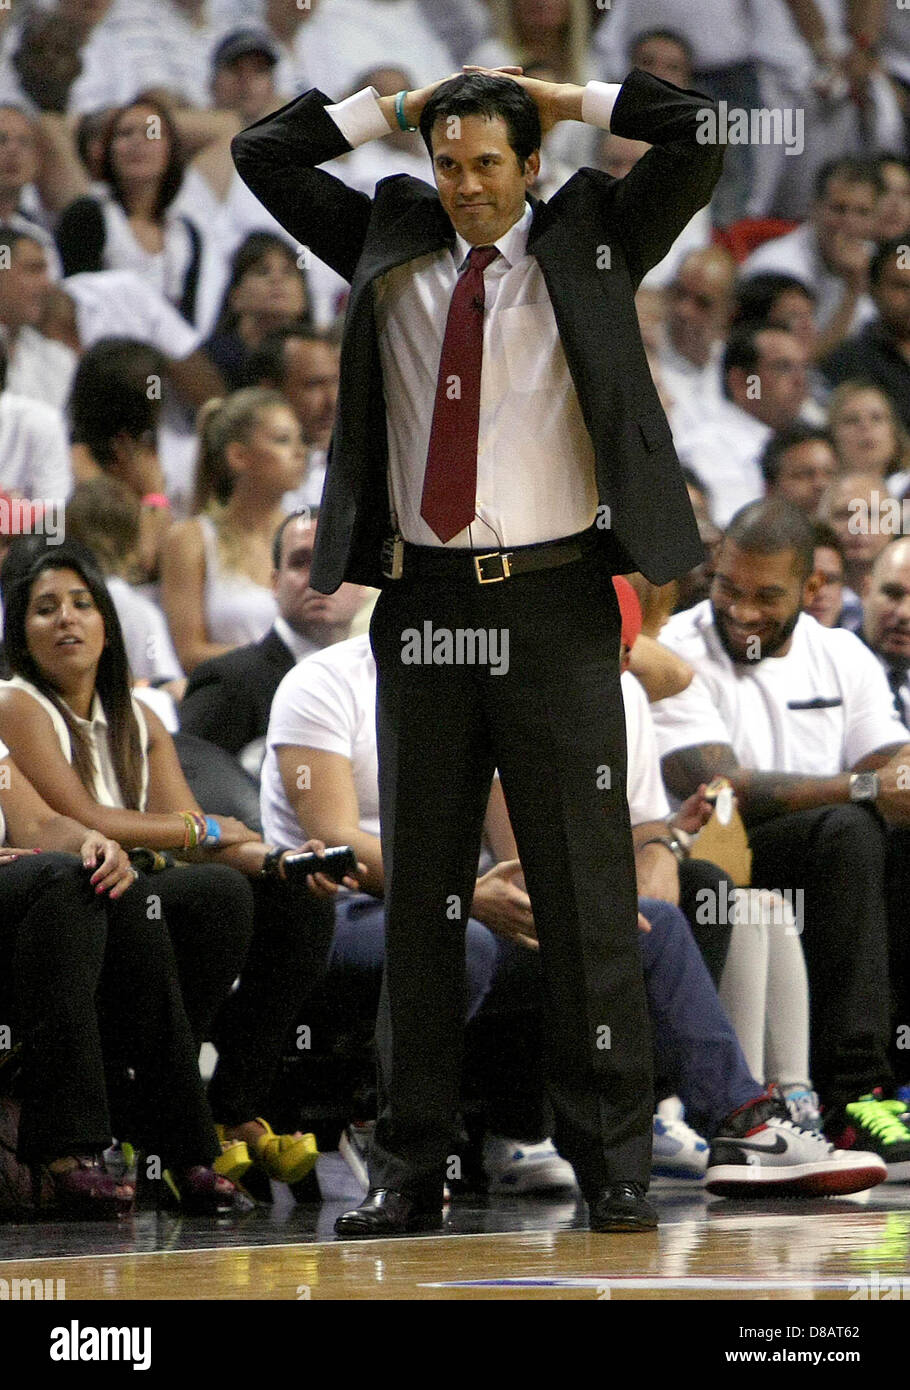 May 22, 2013 - Miami, Florida, U.S. - Miami Heat Coach Erik Spoelstra reacts after the Pacers scored a basket during third quarter action of the Eastern Conference finals game one between the Heat and the Indiana Pacers Wednesday evening May 22, 2013 at American Airlines Arena in Miami. (Credit Image: © Bill Ingram/The Palm Beach Post/ZUMAPRESS.com) Stock Photo